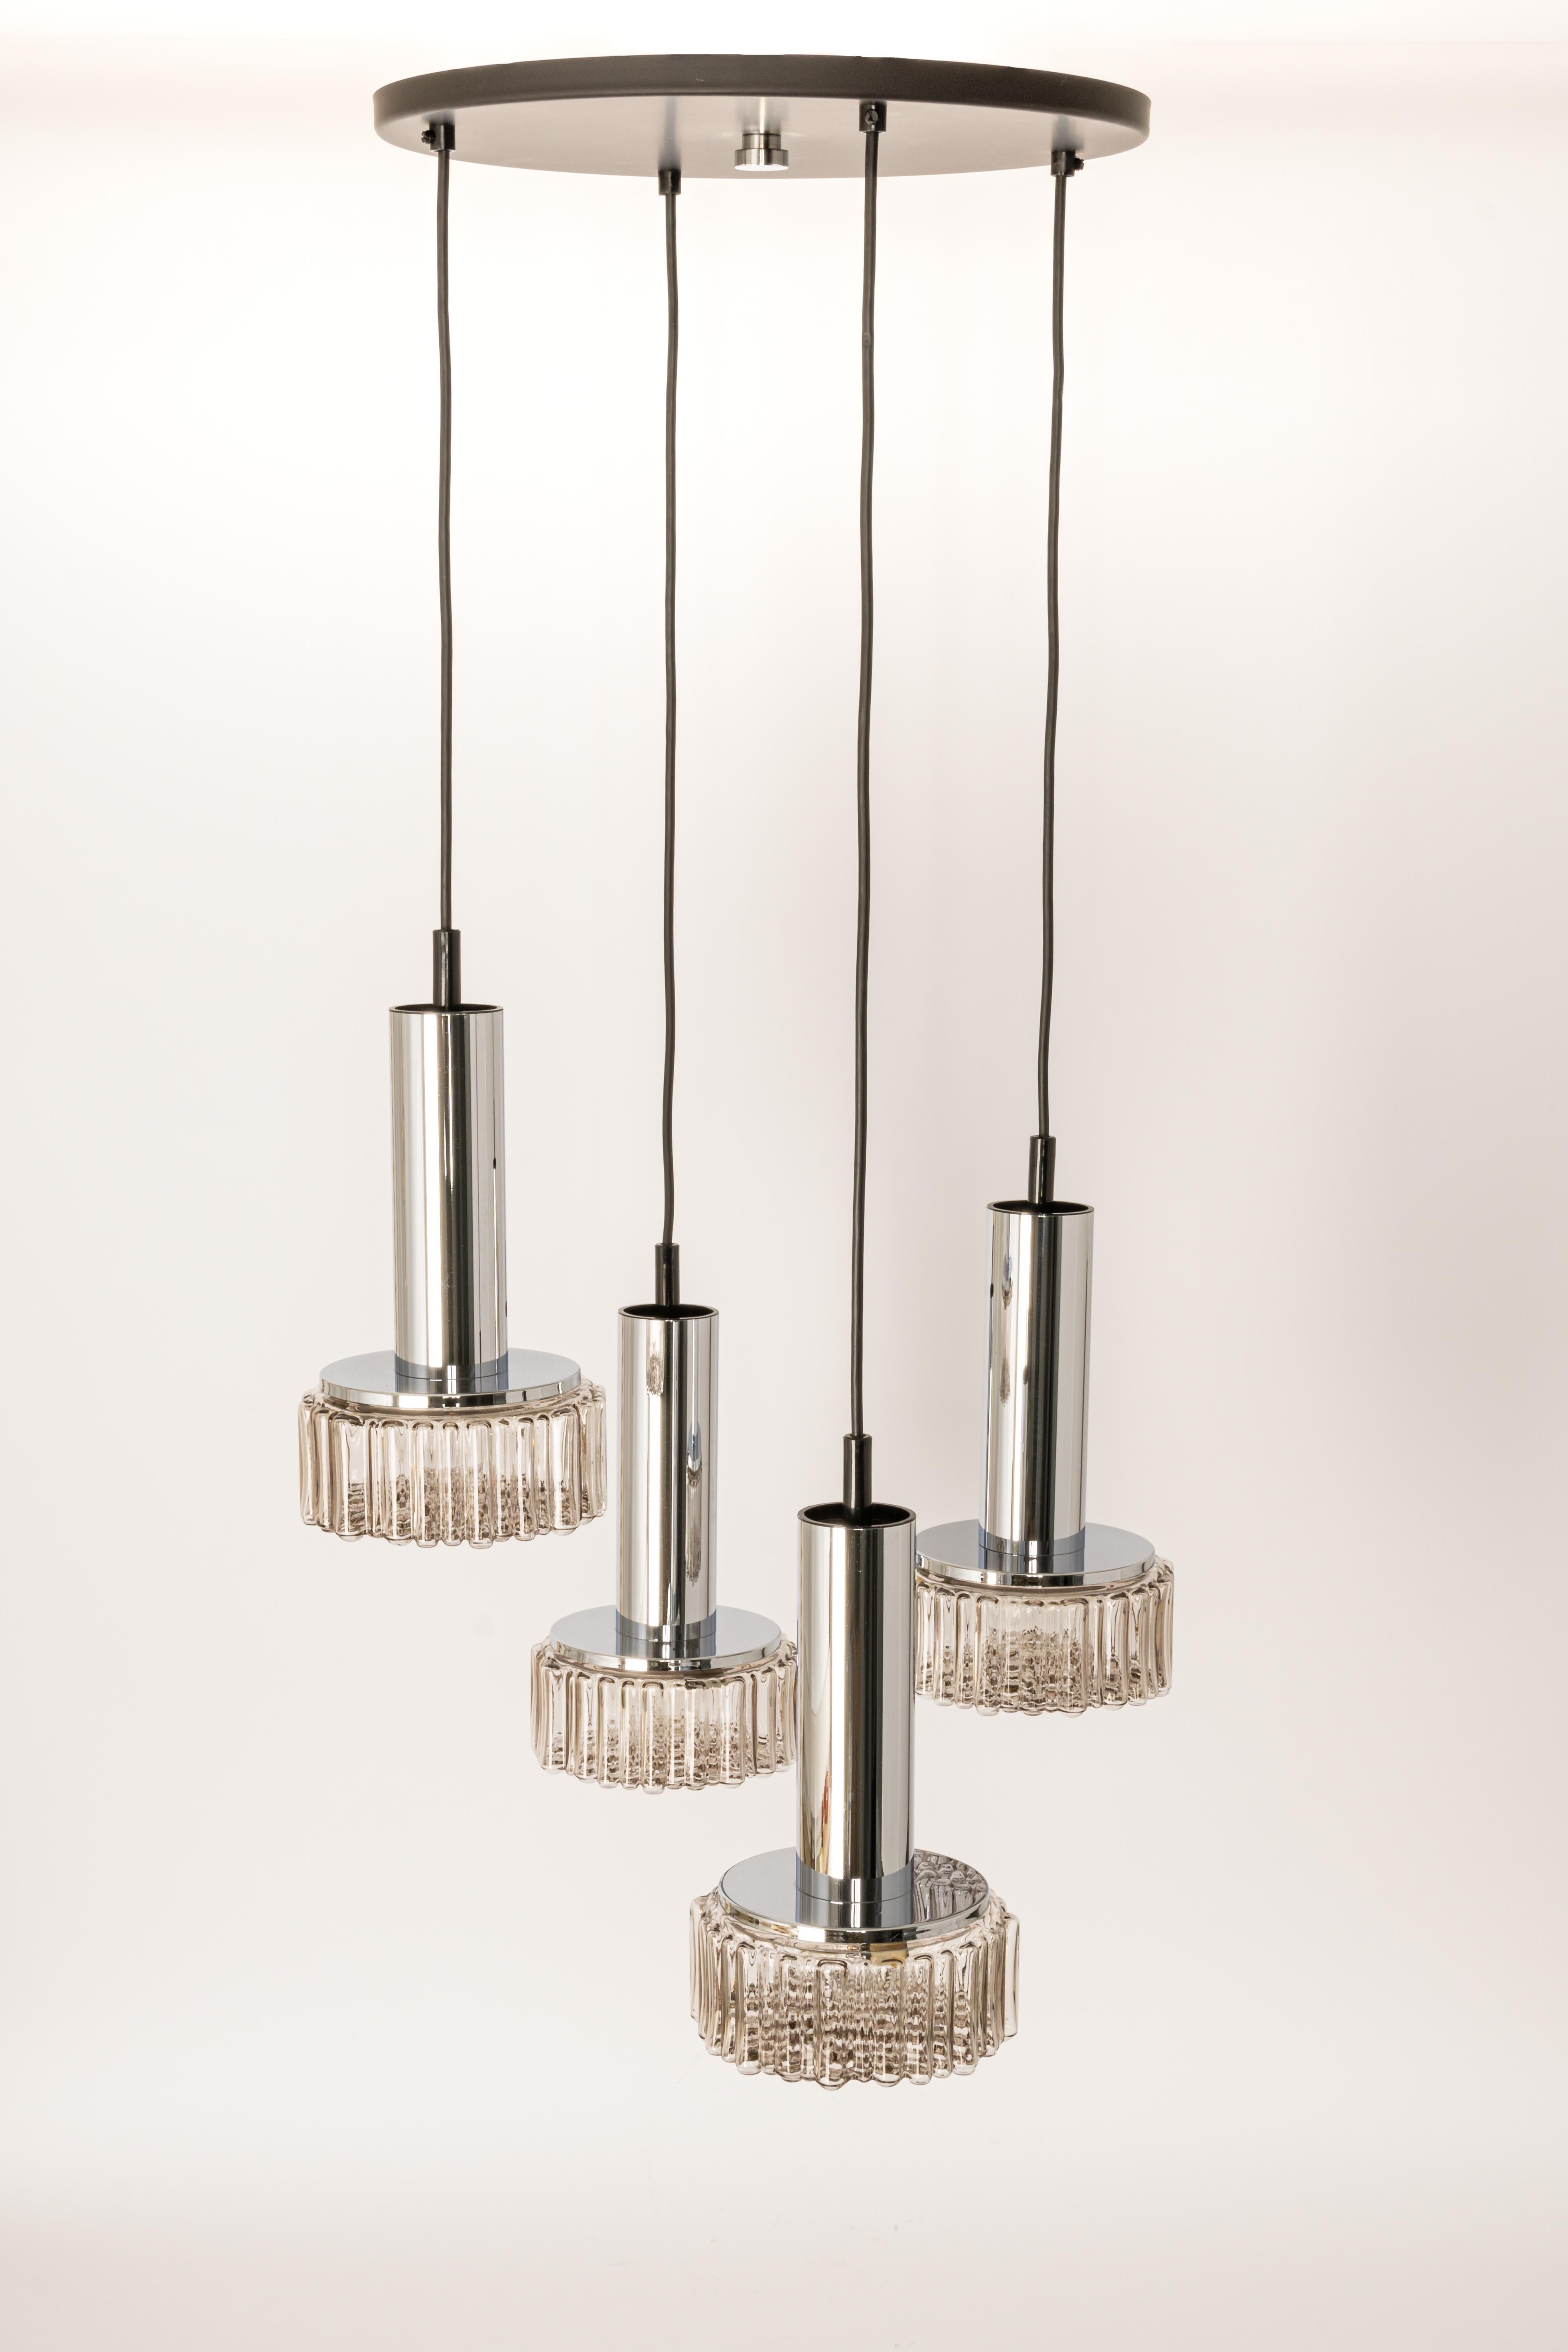 A special large cascading chandelier designed by Rolf Krüger for Staff Leuchten, manufactured in Germany, circa 1970s with 4 round bubble smoked glasses.
Wonderful form and stunning light effect.
Sockets: 4 x E26 /E27 standard bulb. (100 W